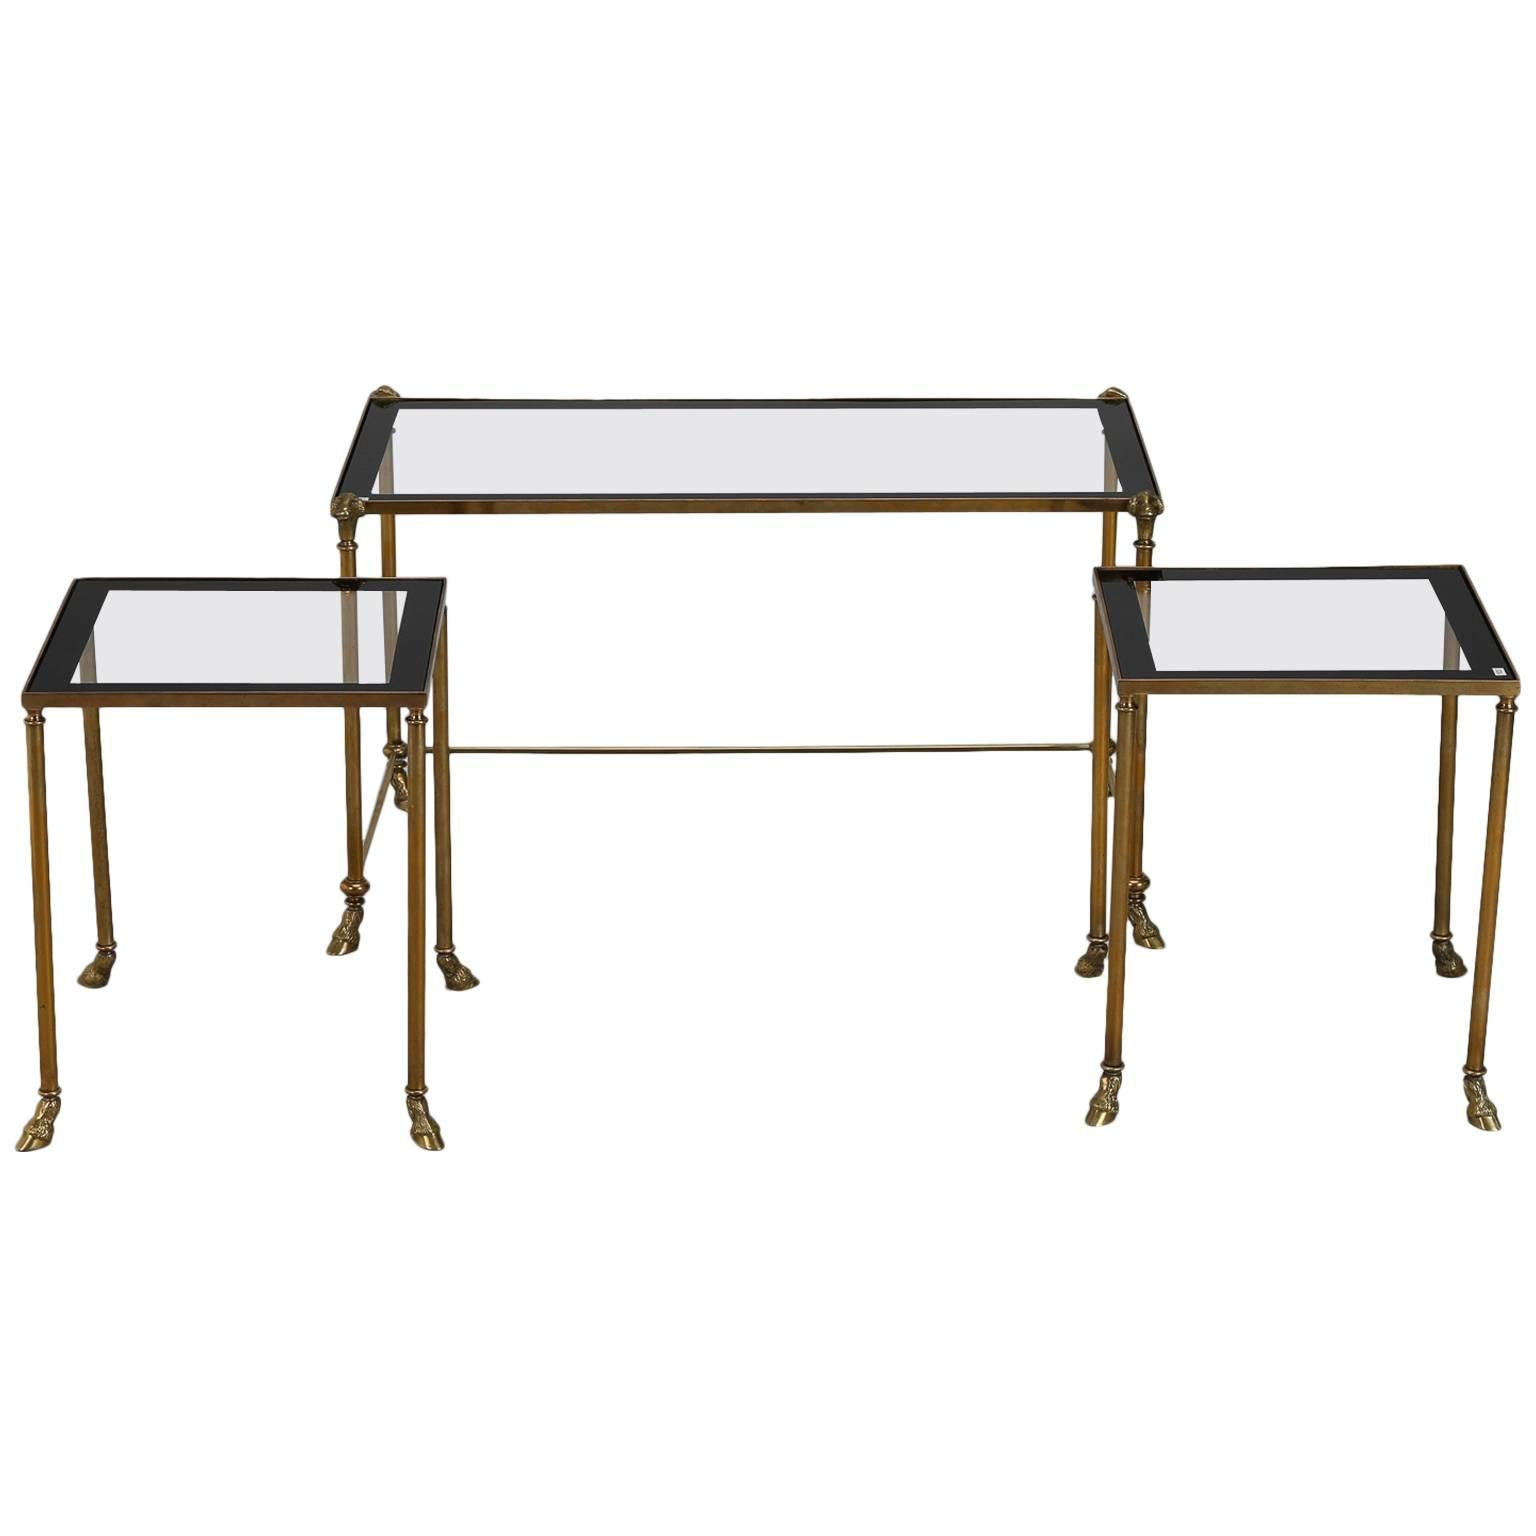 Trio Brass and Glass Ram's Head and Hoof Feet Nesting Tables